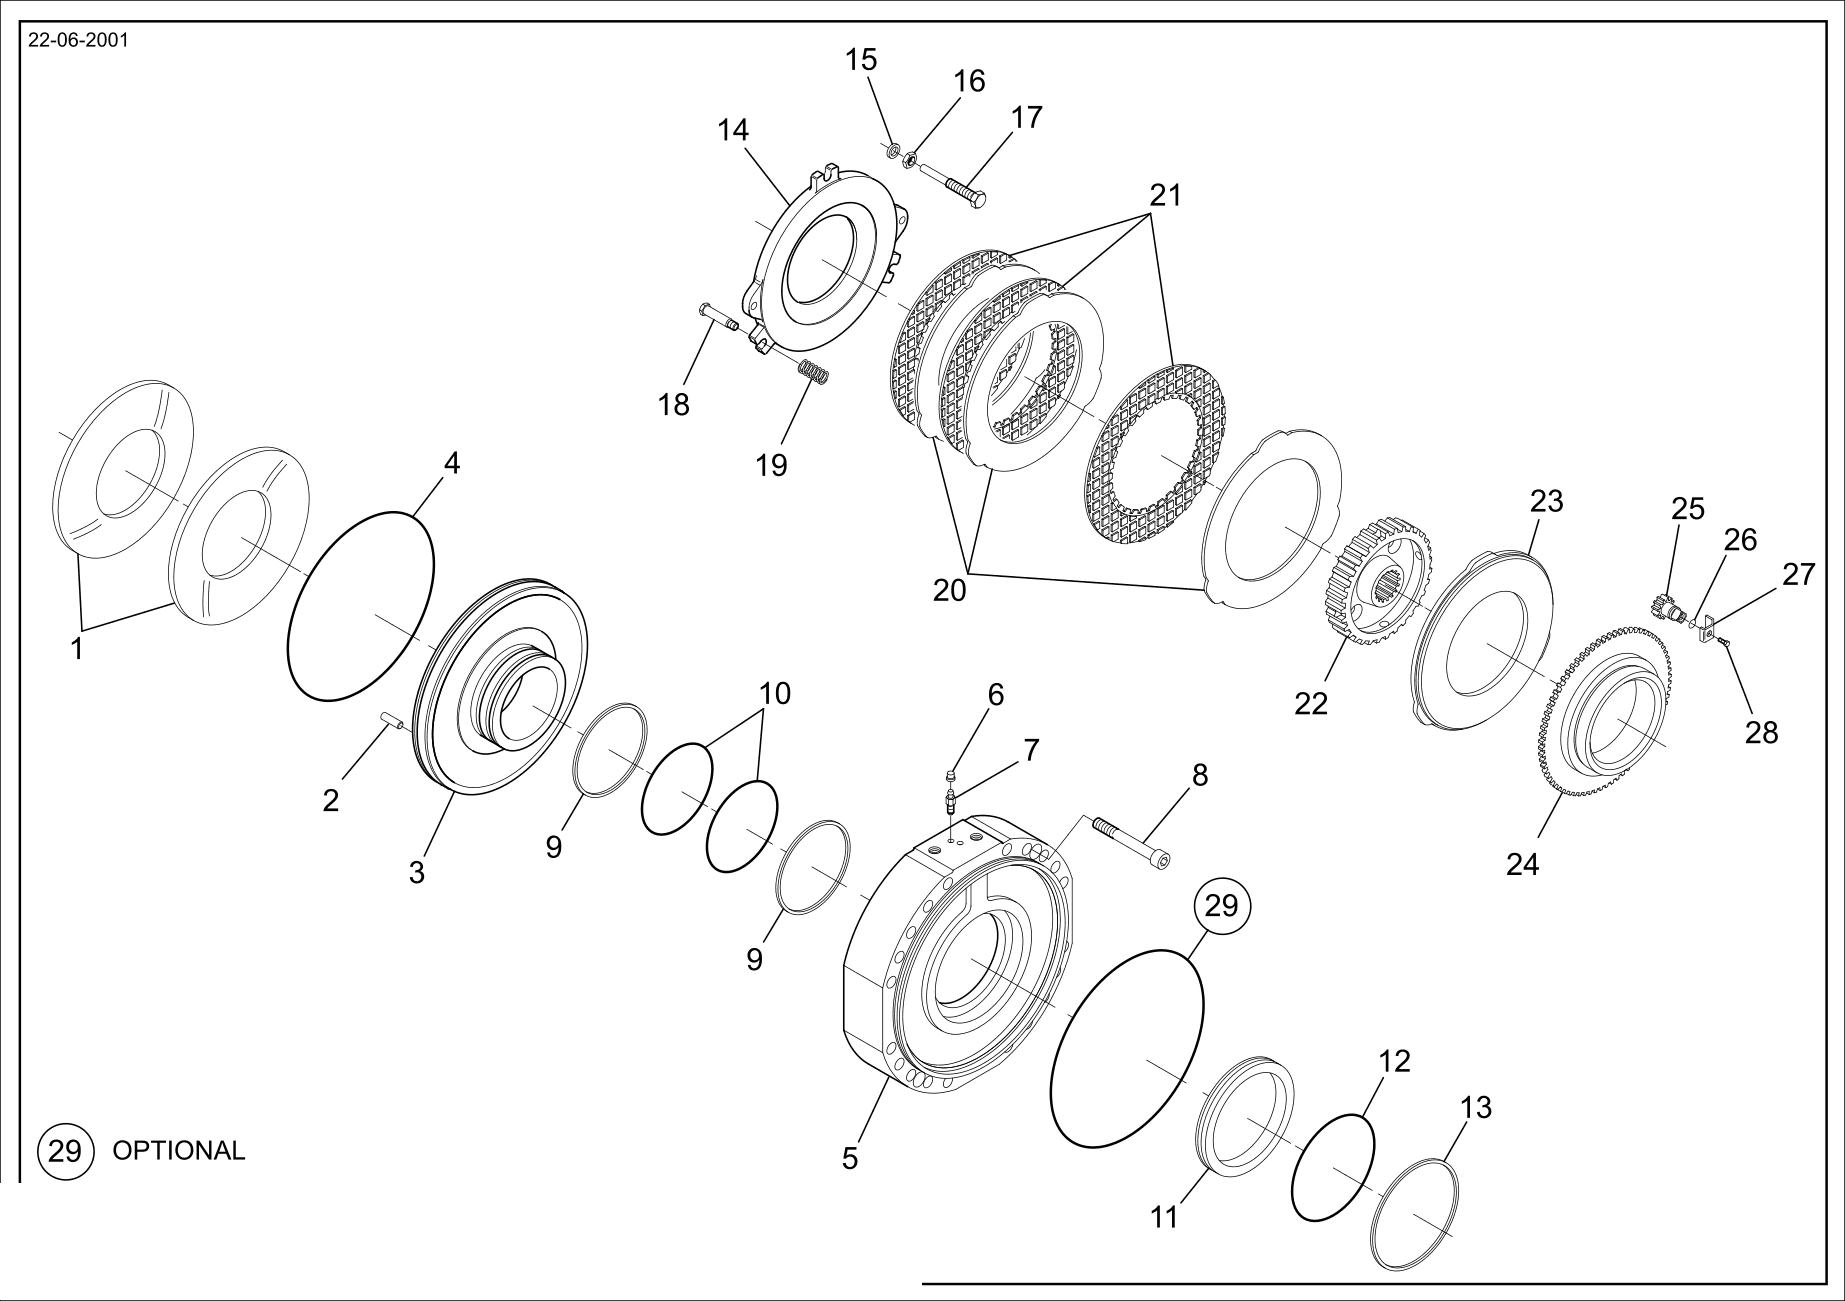 drawing for MERLO 048695 - O - RING (figure 2)